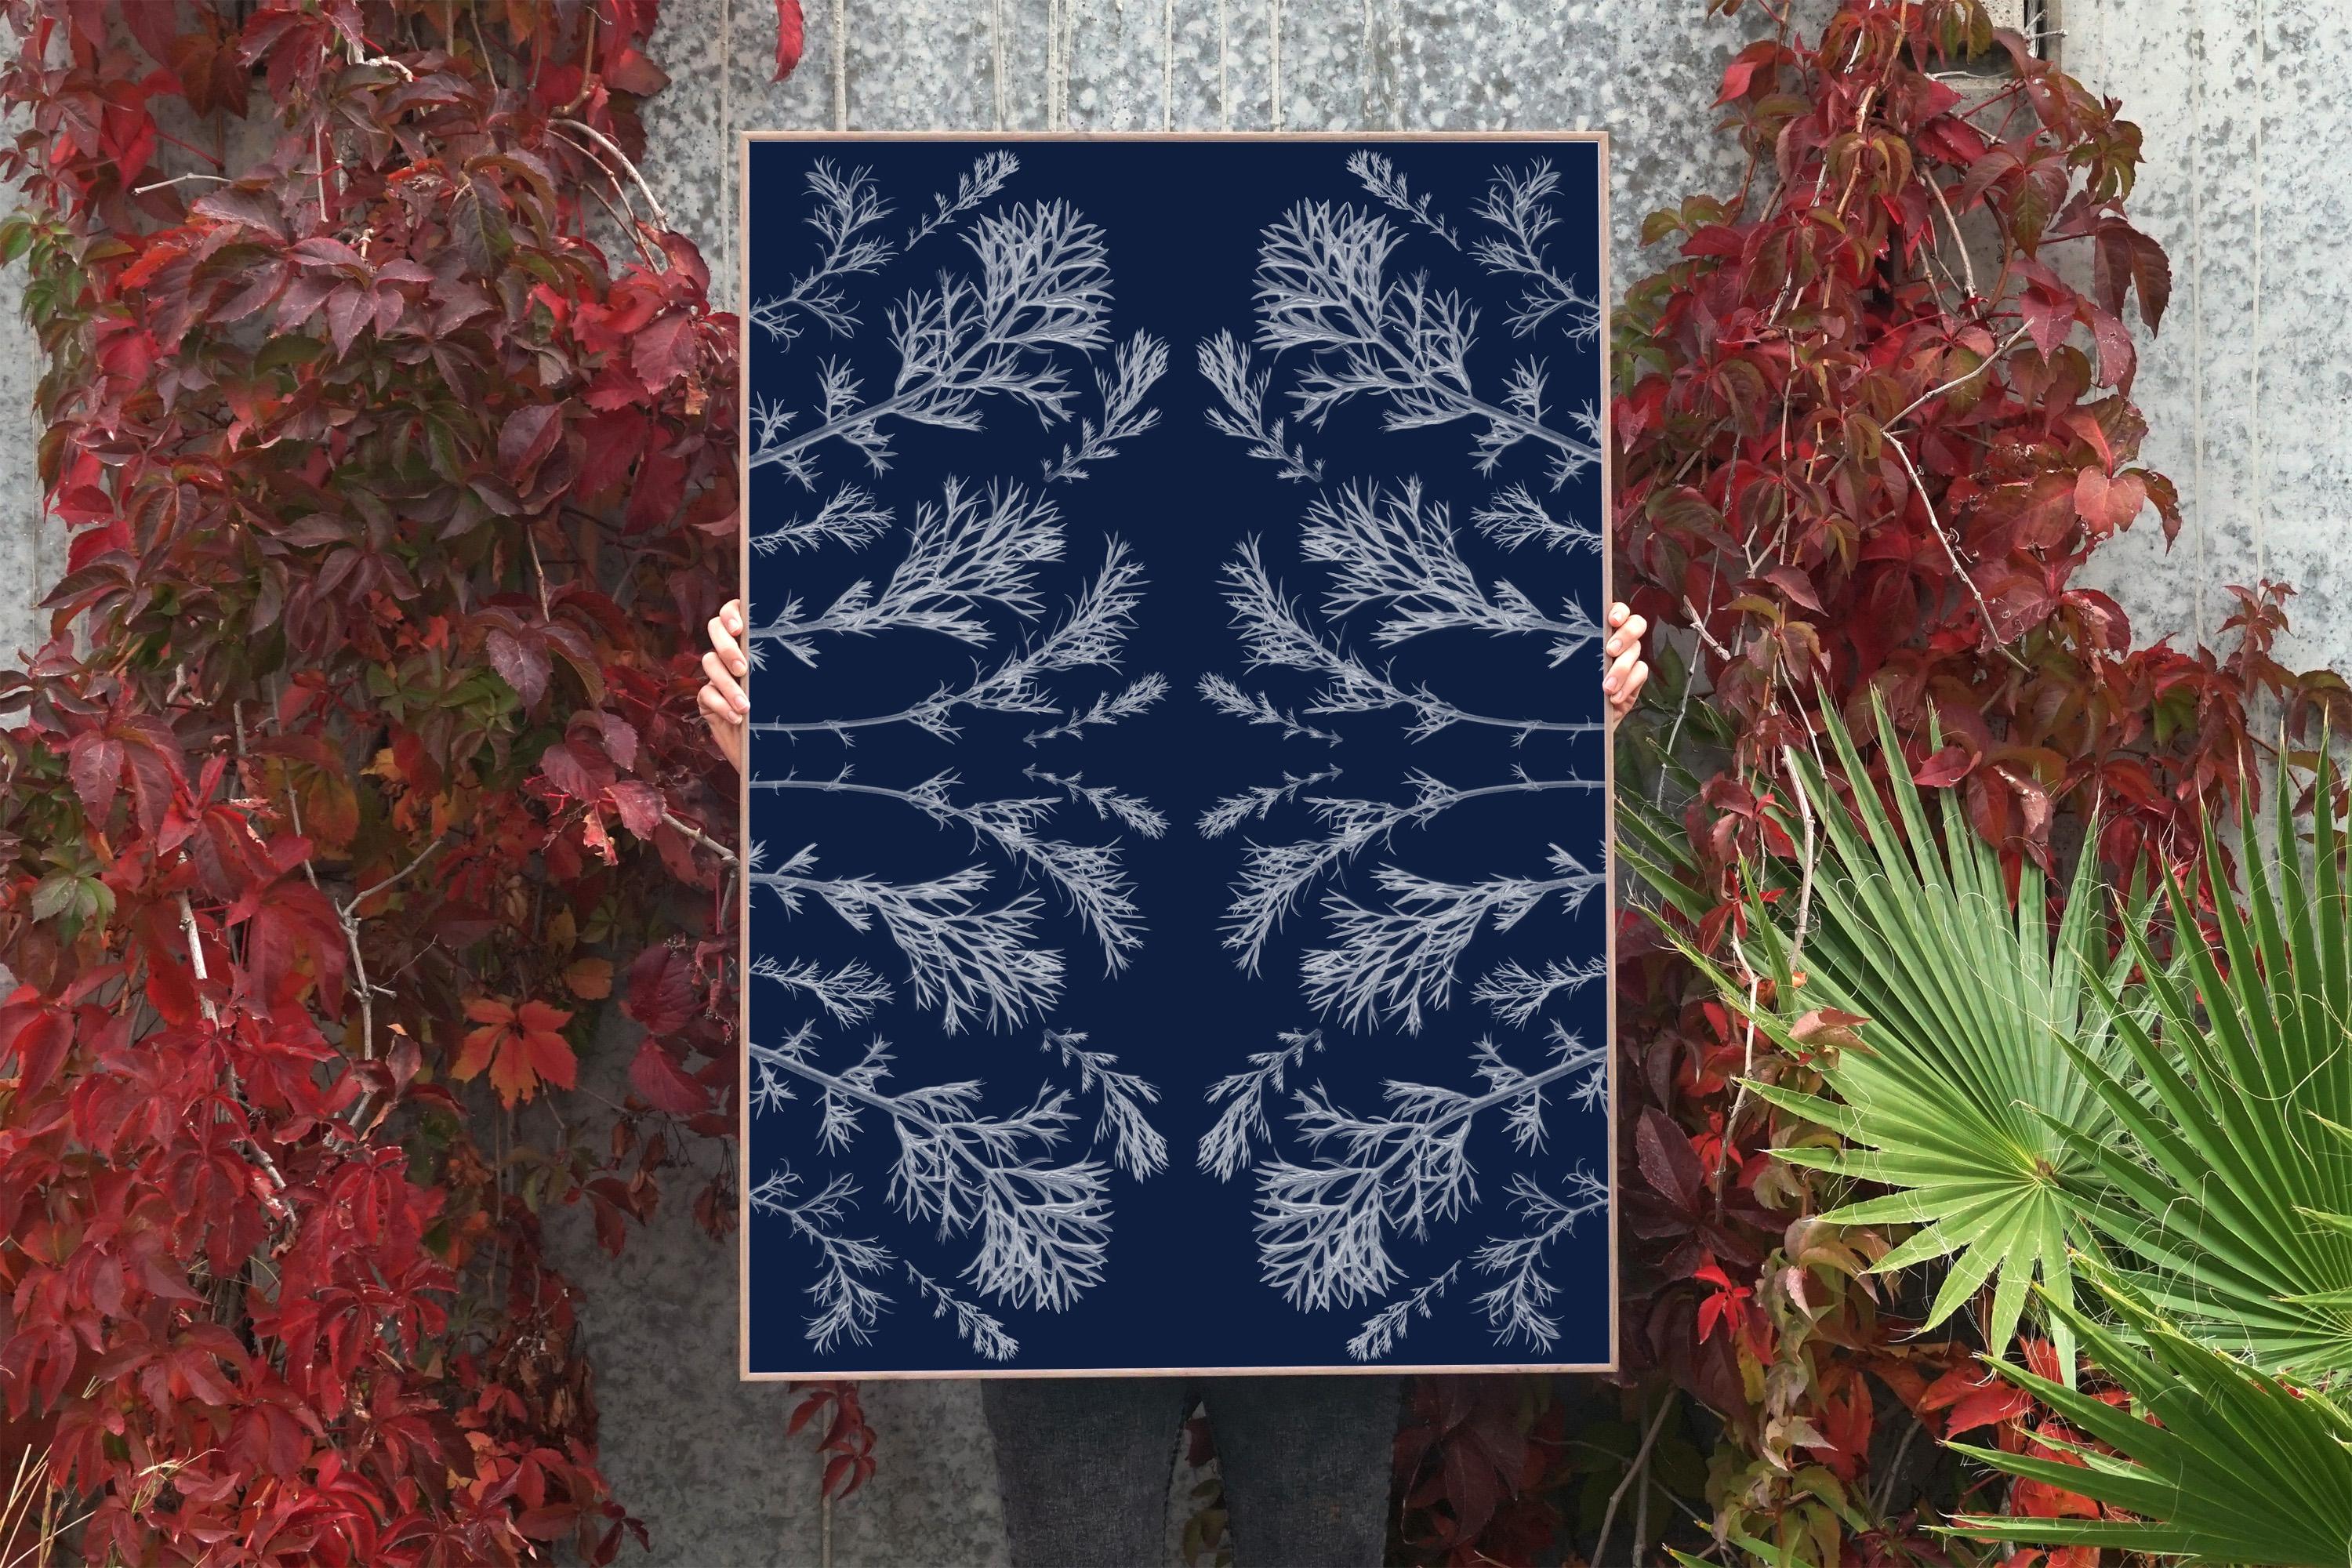 Plant pressed Cyanotype, Kaleidoscopic, Handmade in Sunlight, Limited Edition  - Print by Kind of Cyan